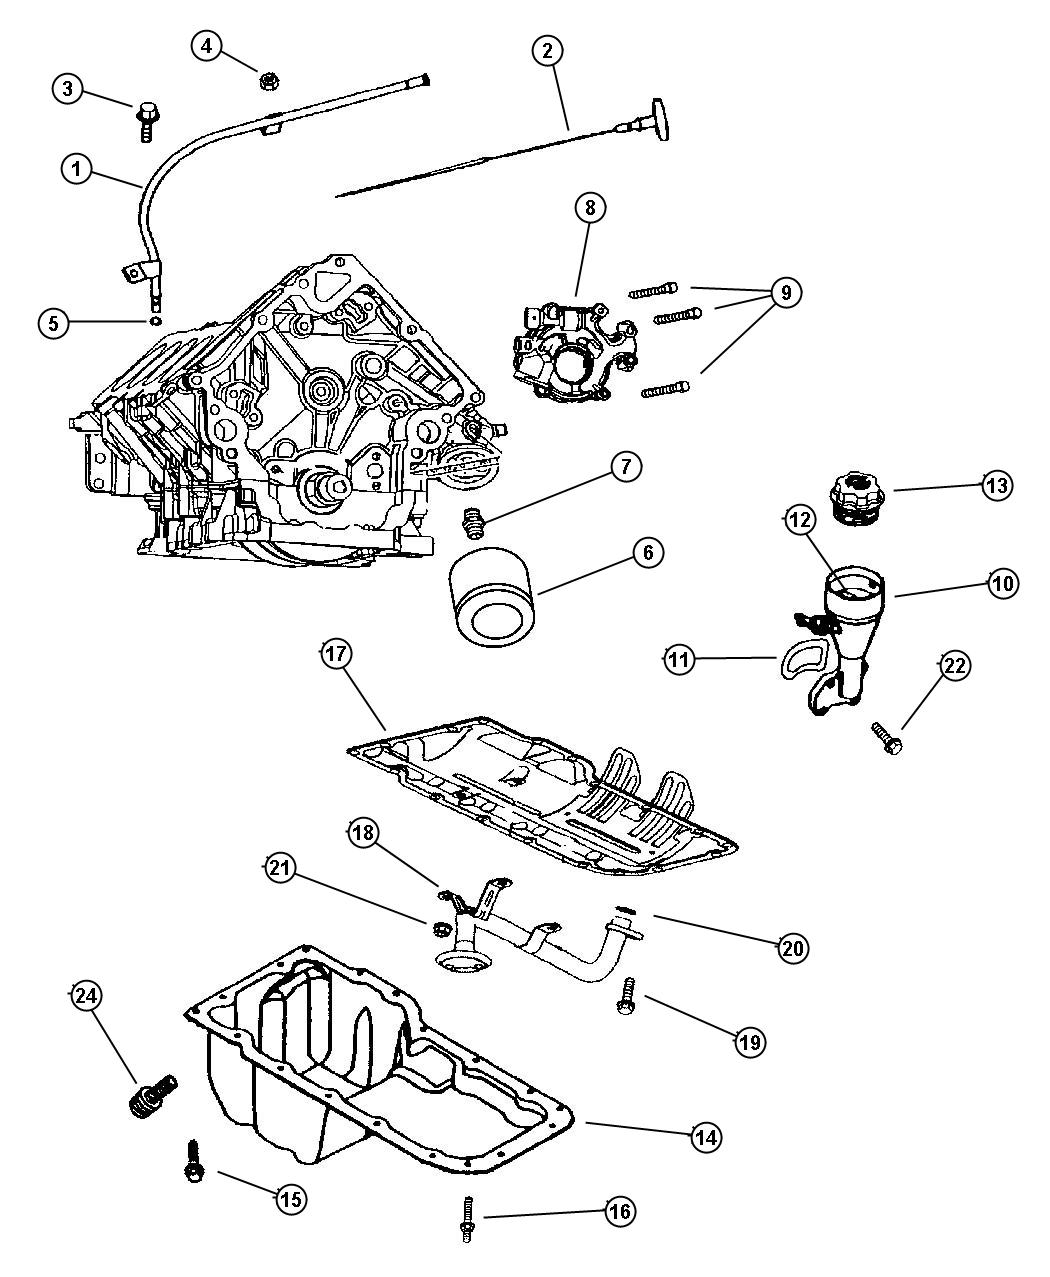 Engine Oiling 4.7L [Engines - All 4.7L Gas]. Diagram